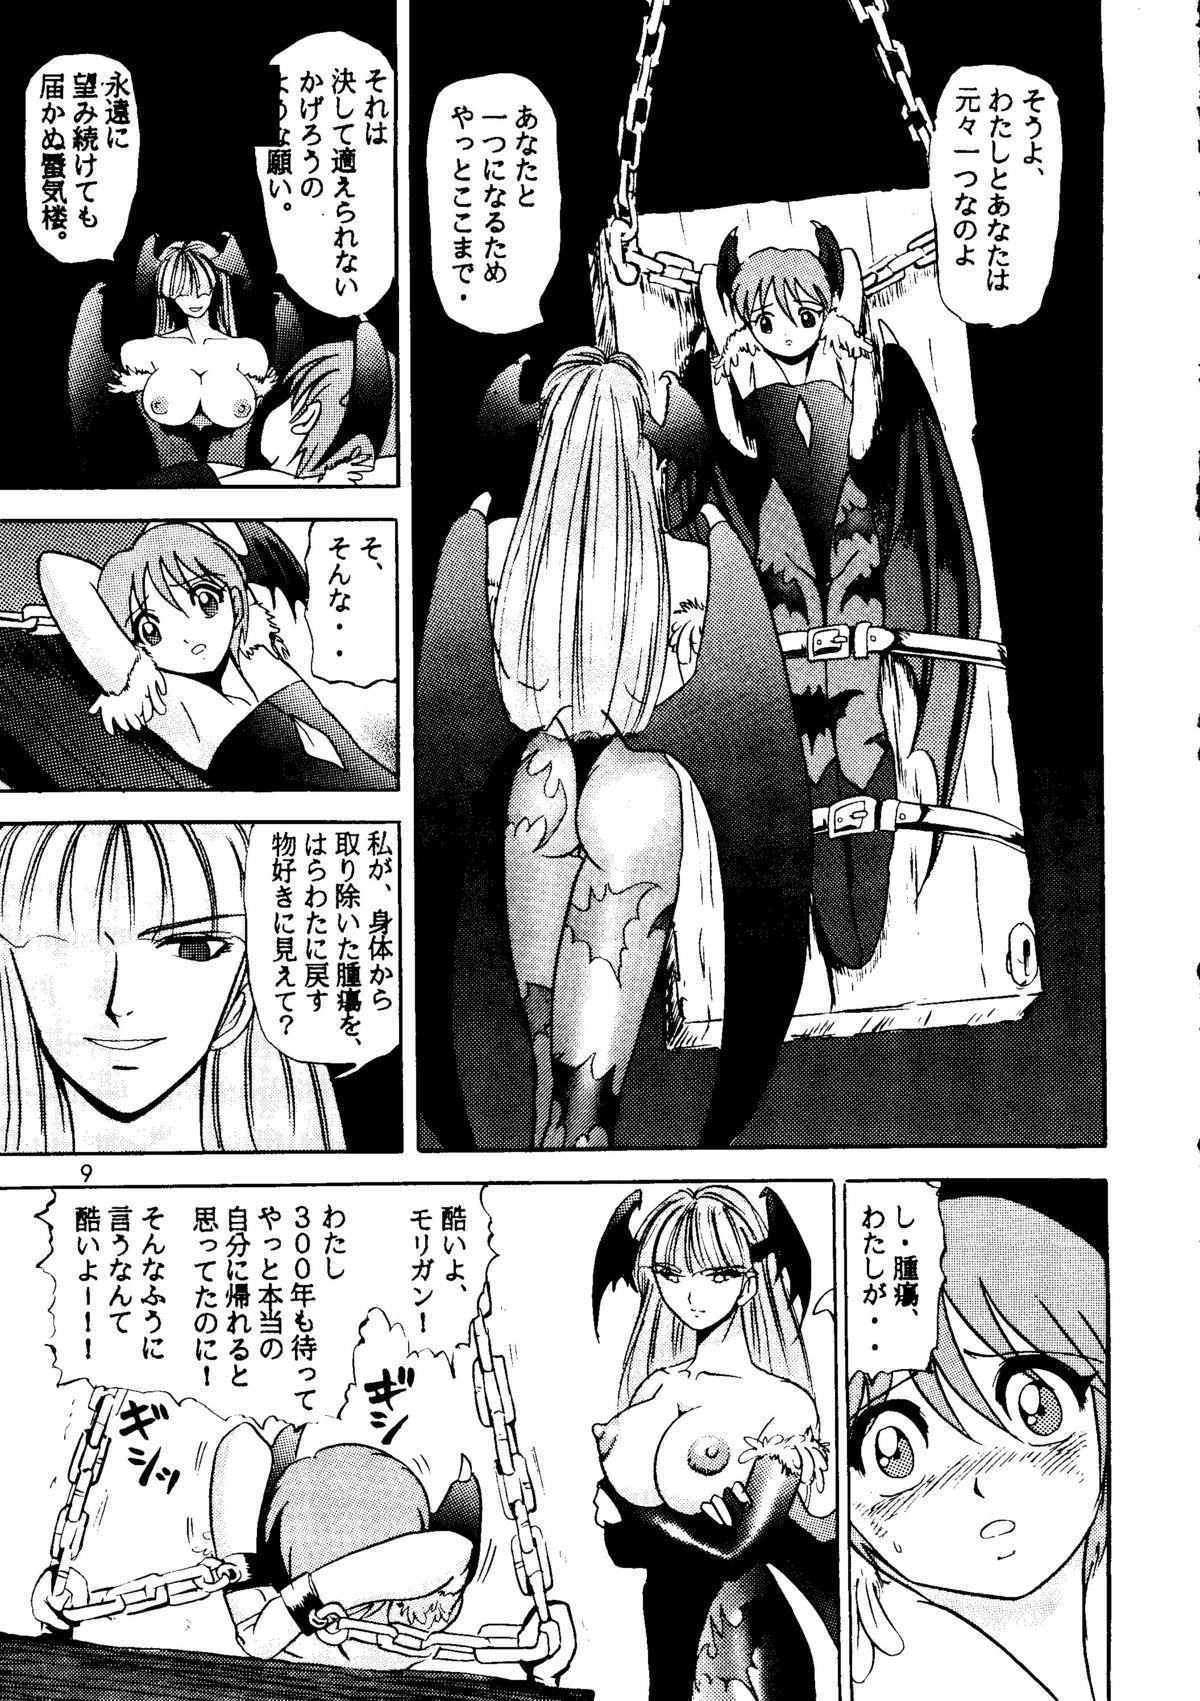 Twink Lilith Muzan - The Way of the Morrigan - Darkstalkers Cut - Page 8